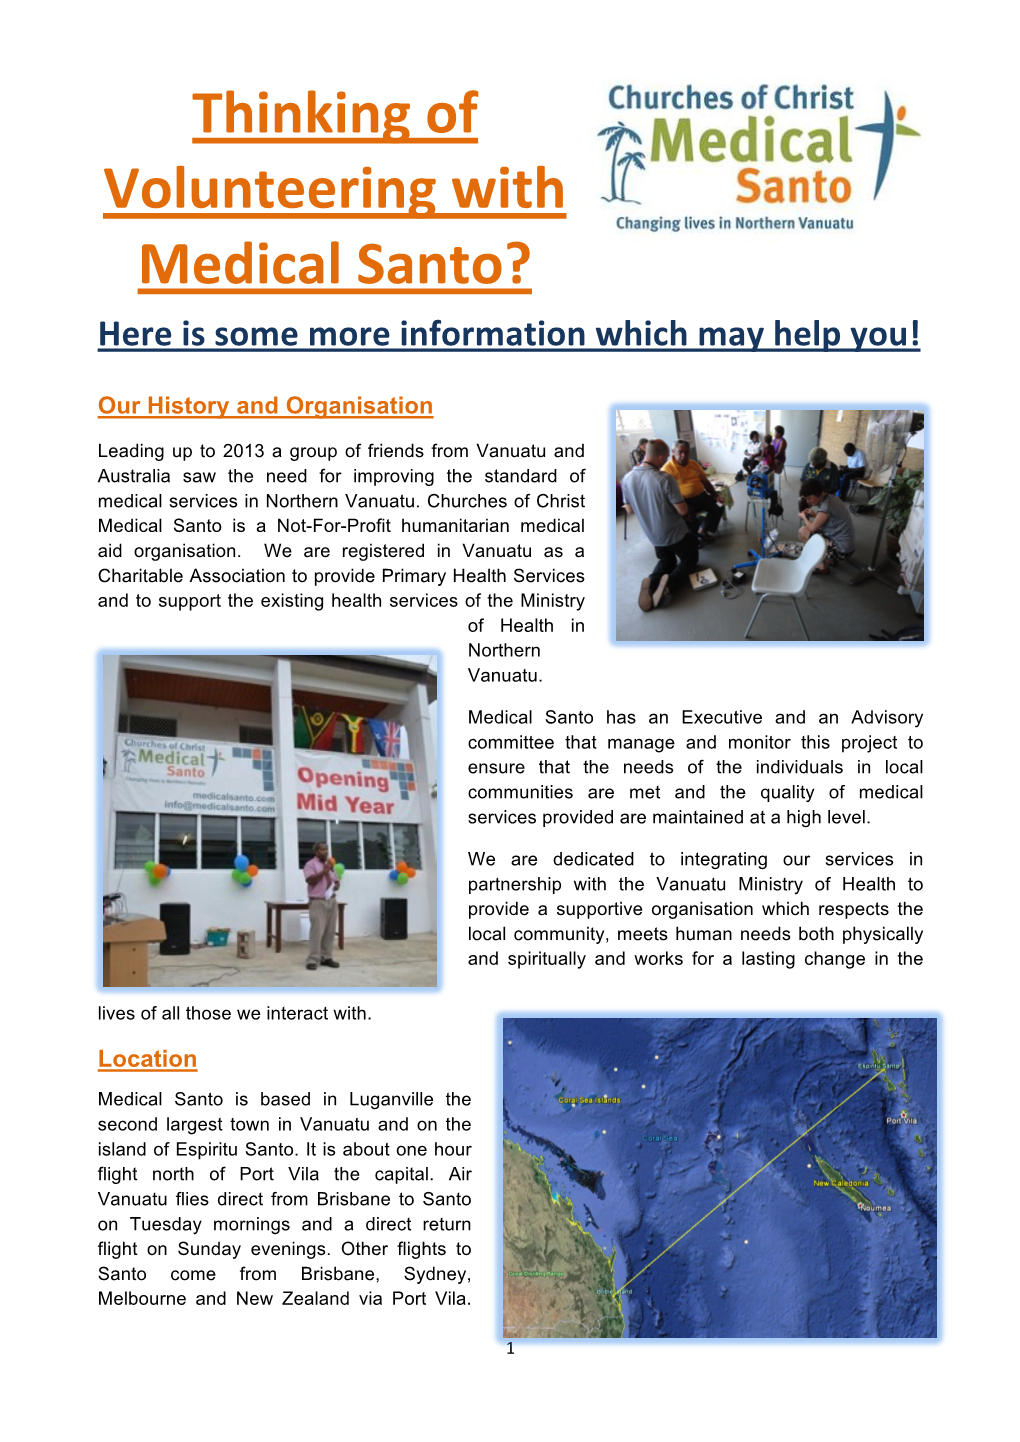 Thinking of Volunteering with Medical Santo?